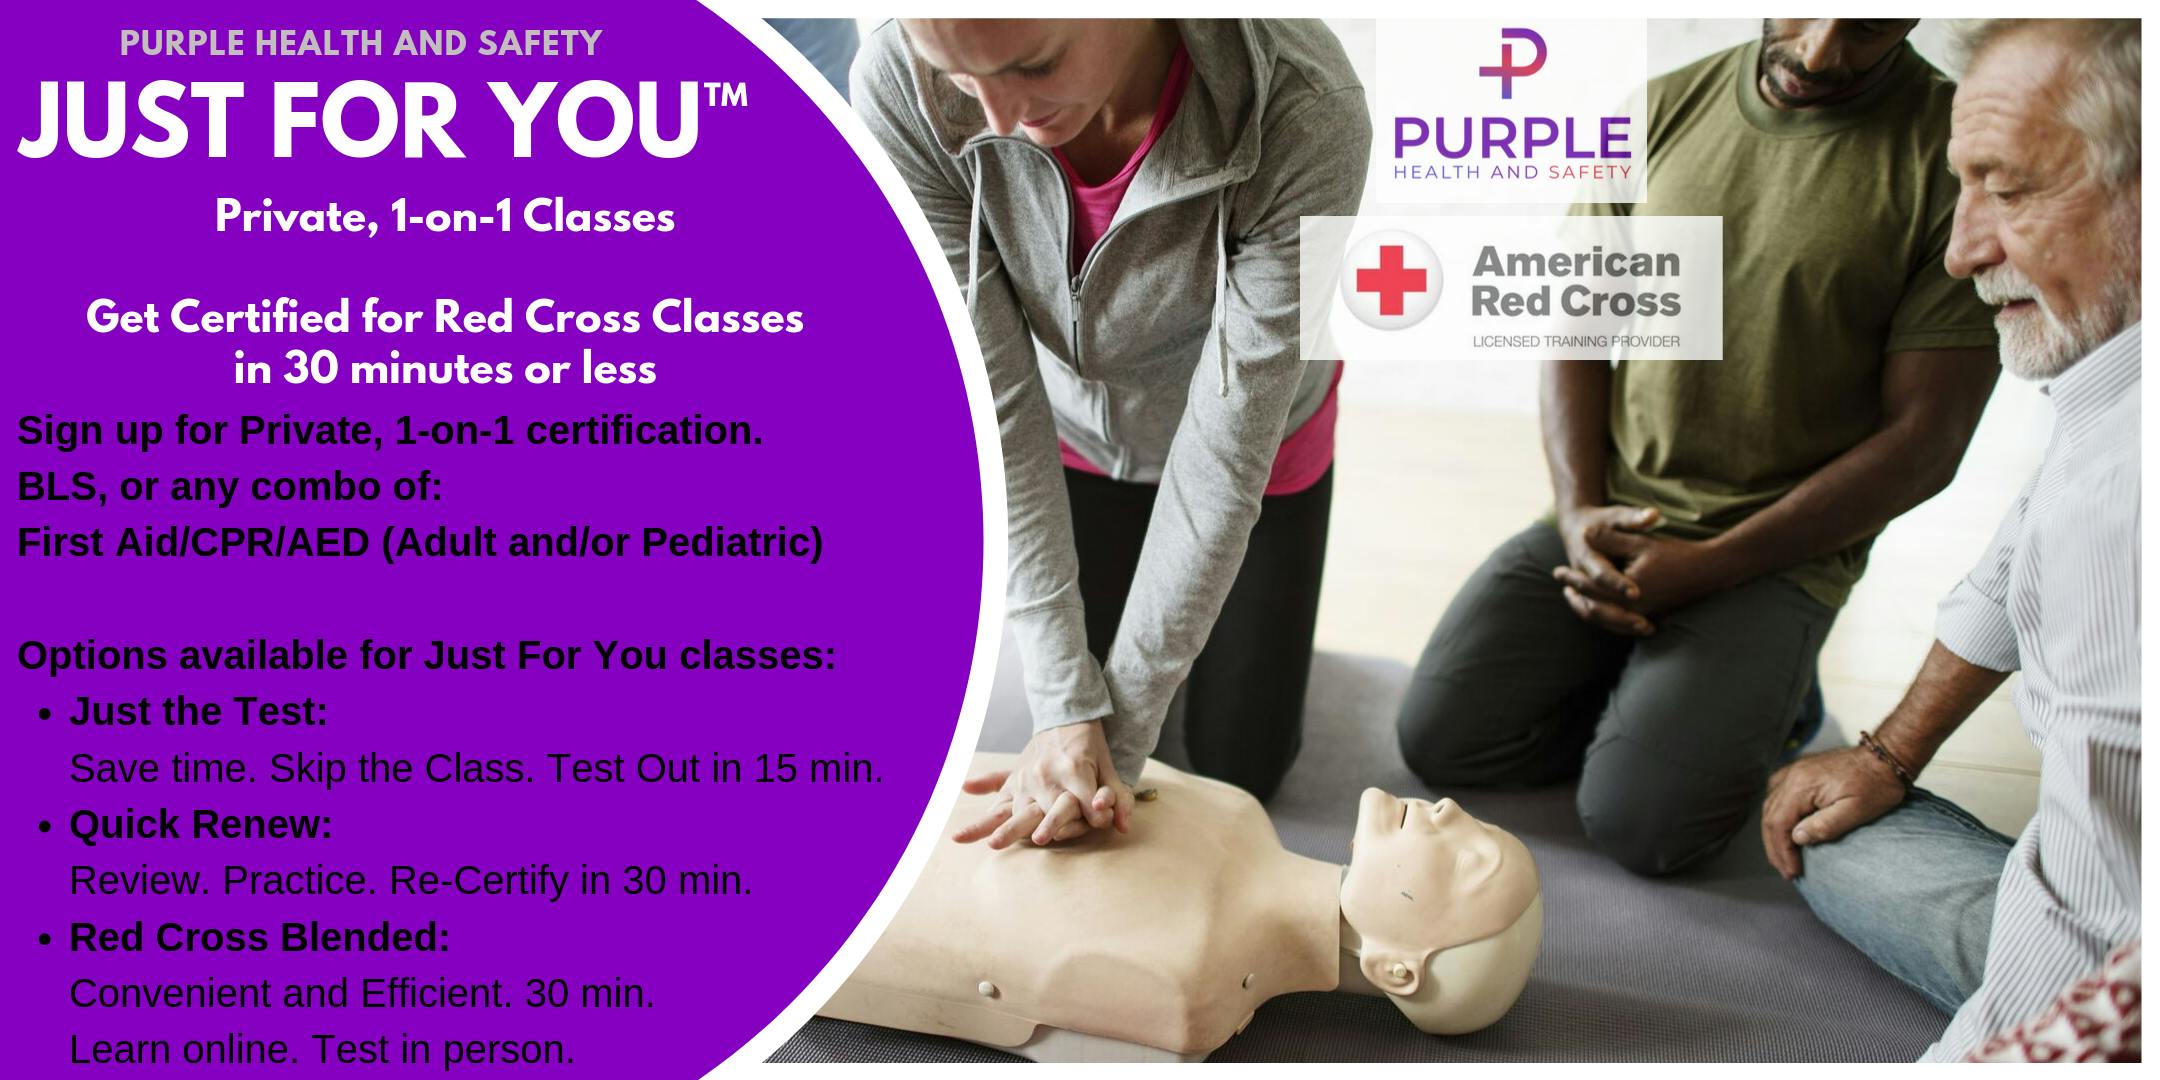 Just for One™. Private 1-on-1 Red Cross Classes in 30 minutes!